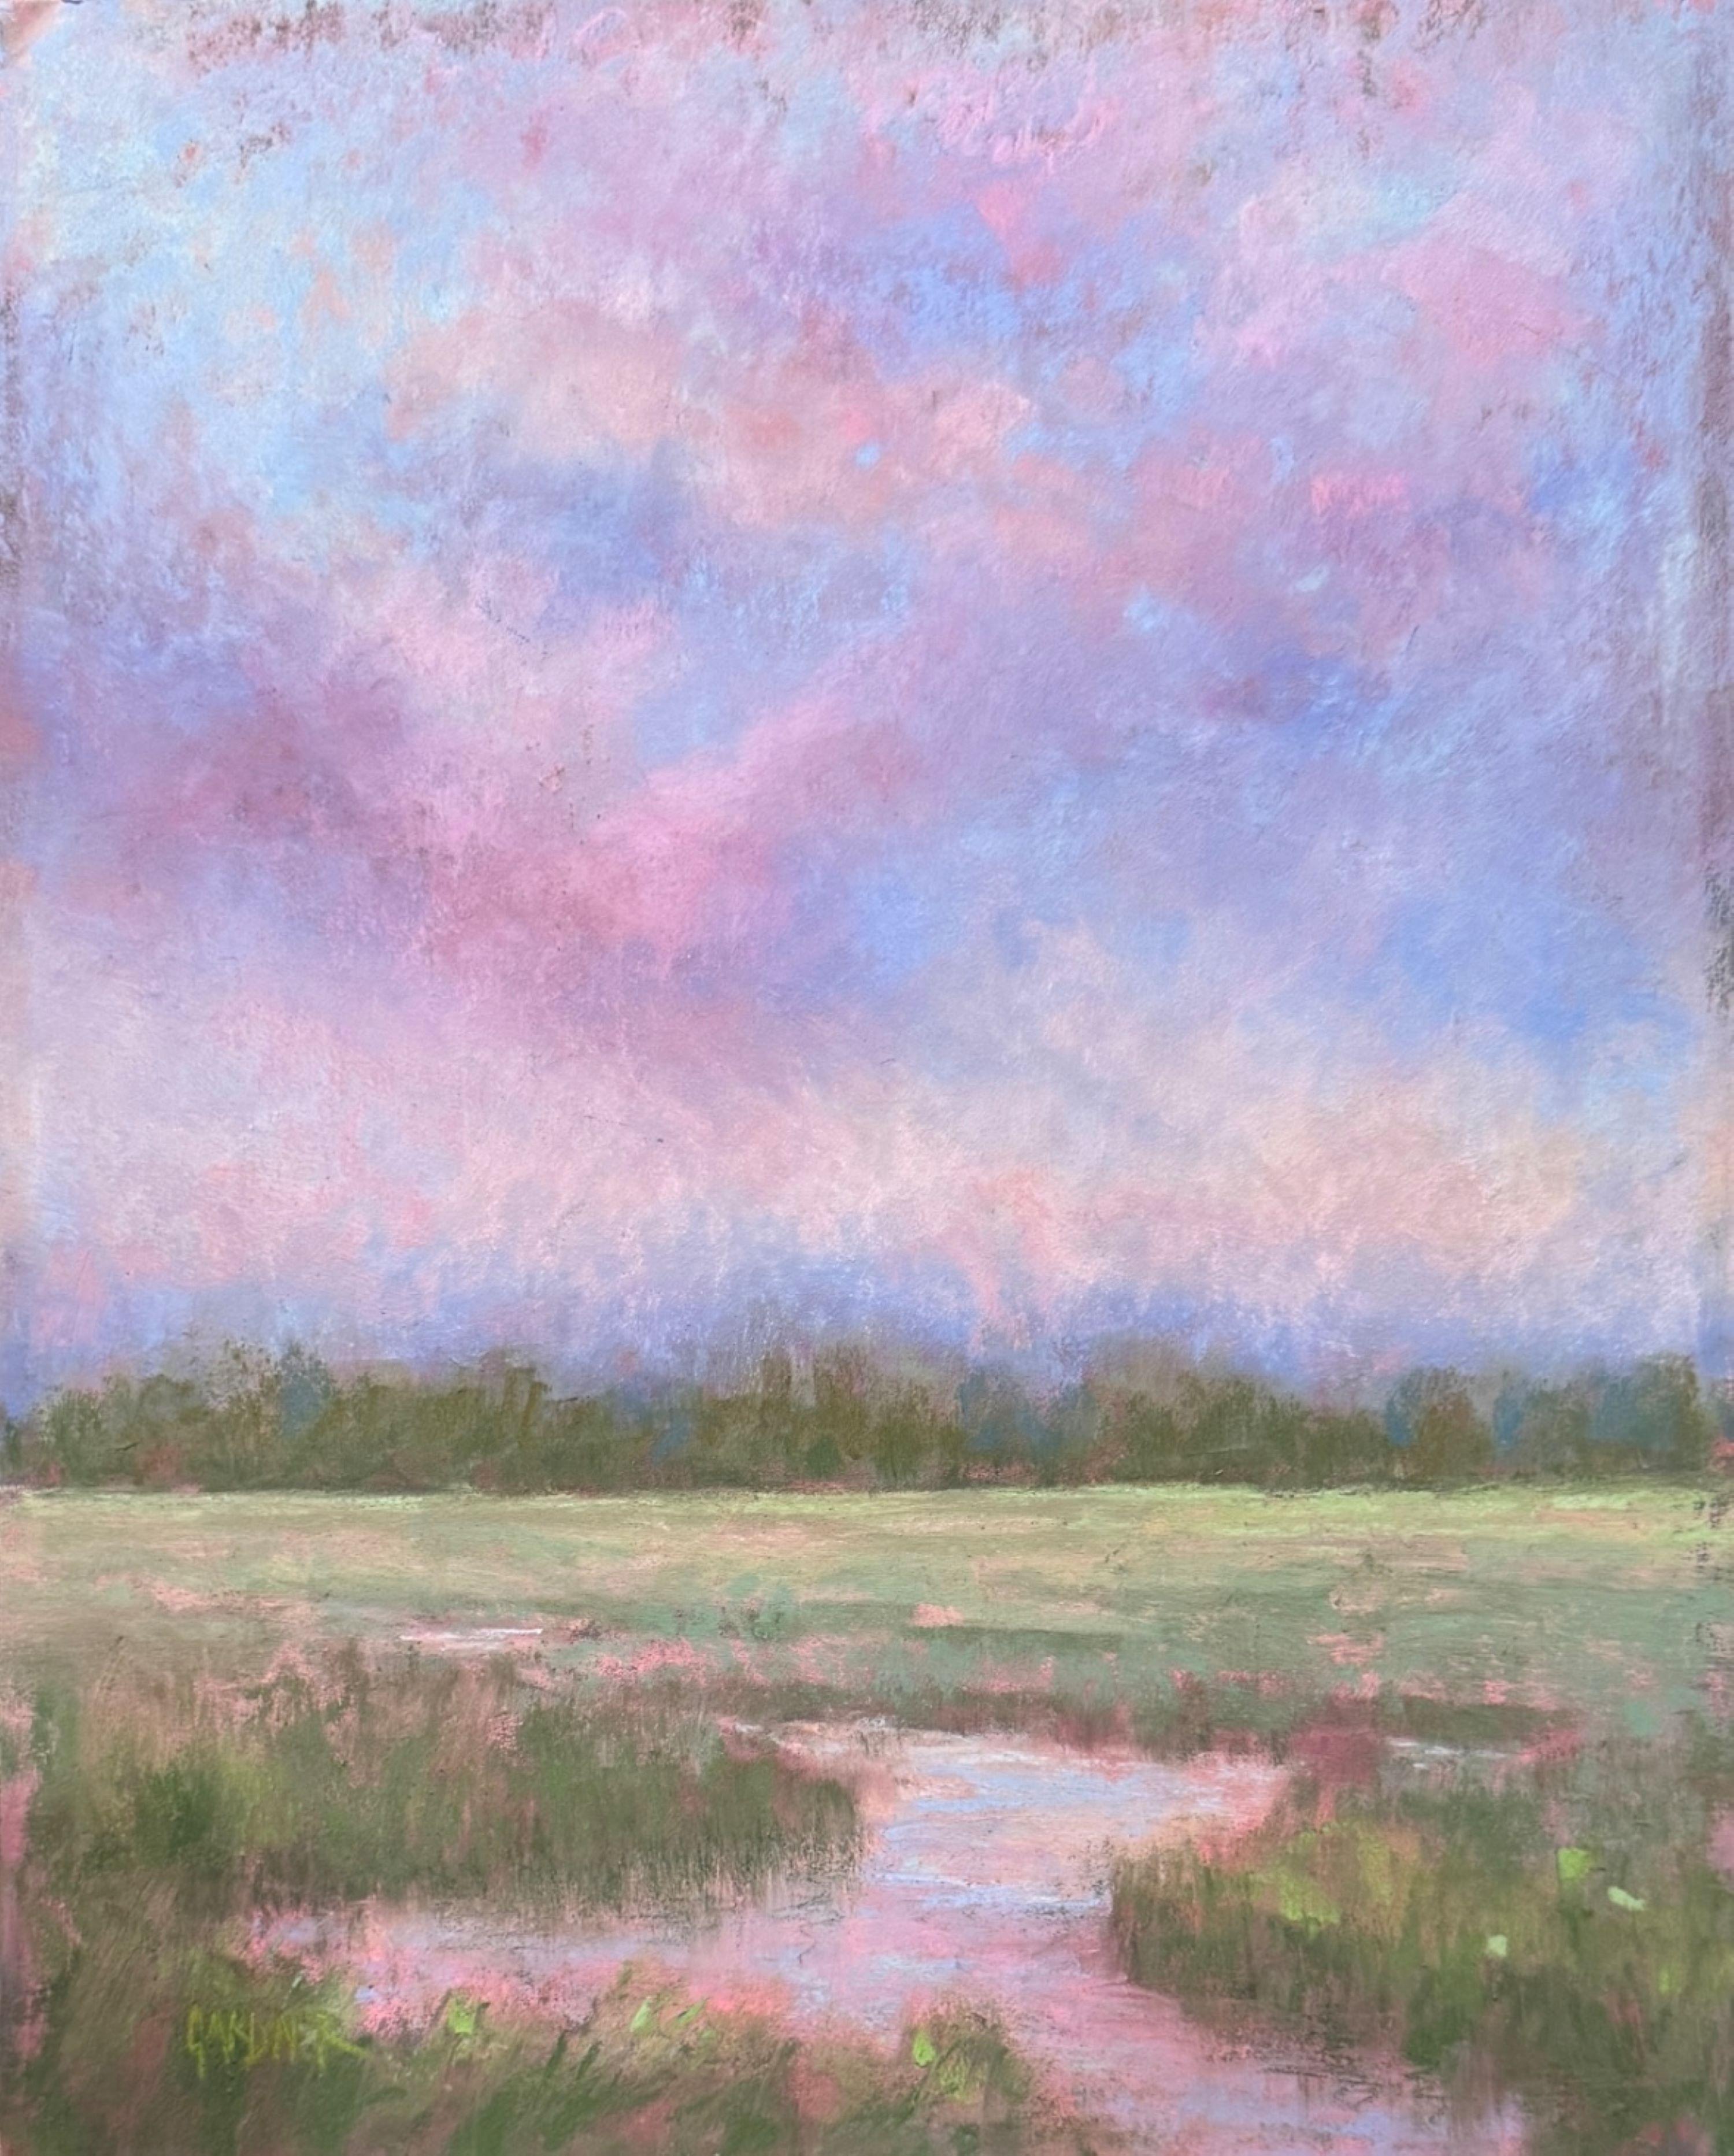 Beginnings of a Bluebird Day 
8.0 x 10.0 x 0.1, 1.0 lbs 
Pastel on archival paper
Hand signed by artist 

Artist's Commentary: 
"I love catching a morning sunrise with all the pink values the sky presents. Although I’ve seen this image live many,